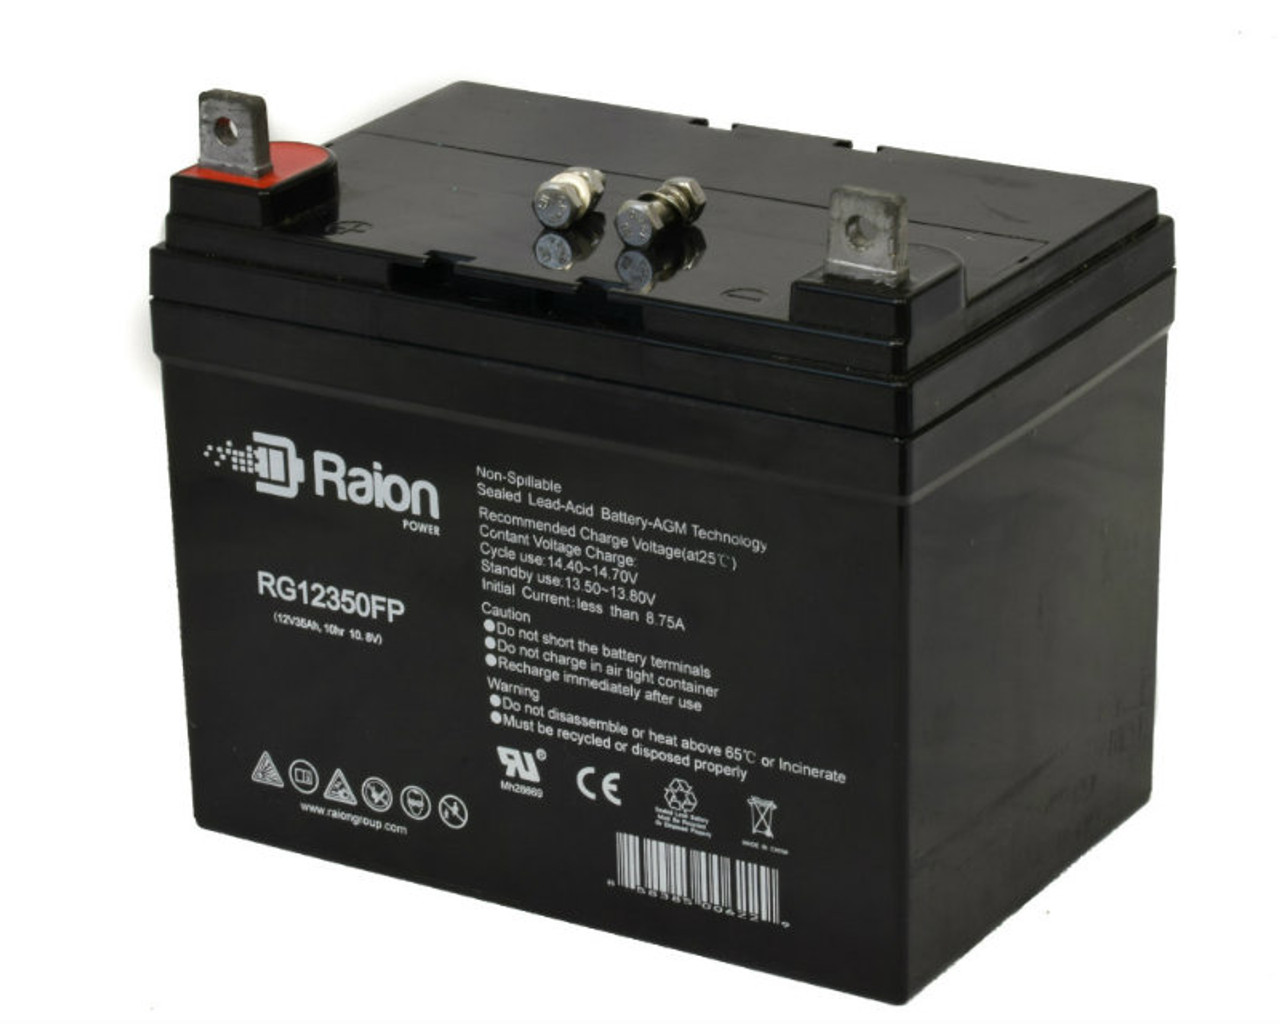 Raion Power Replacement 12V 35Ah RG12350FP Battery for Agco Allis 1716G